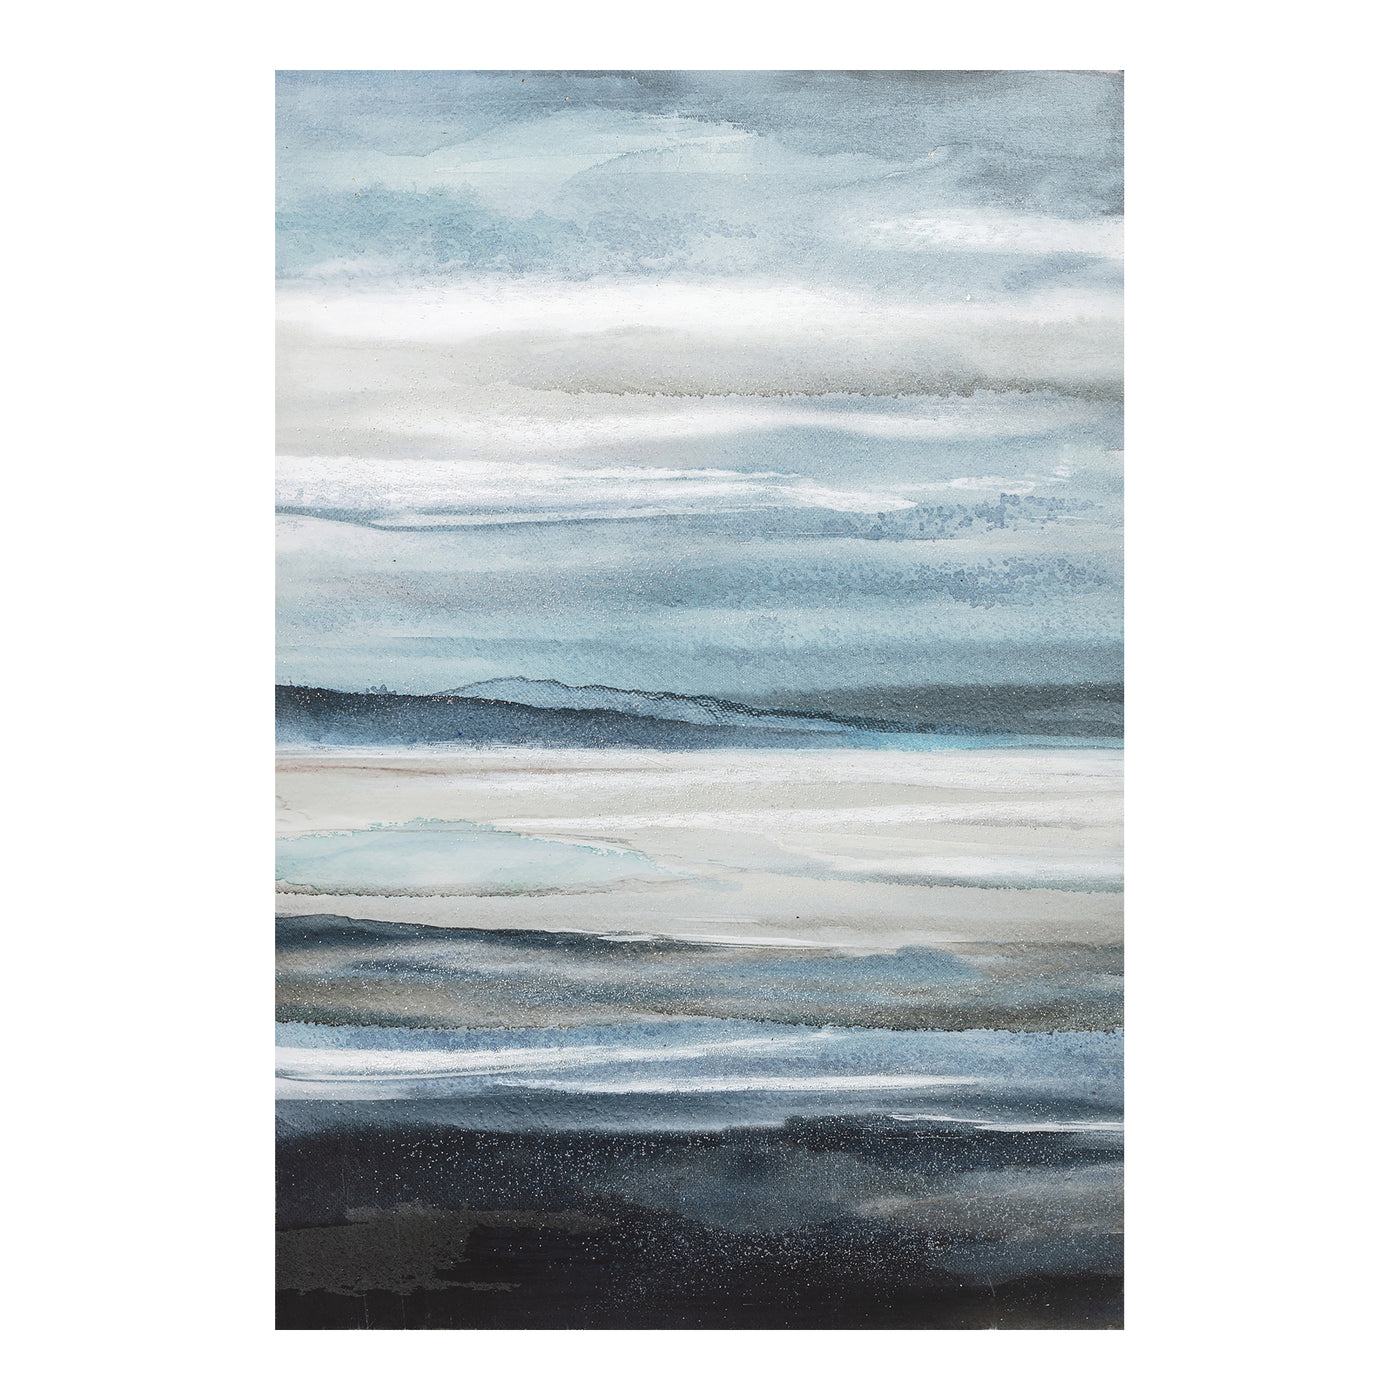 The Open Sea painting is a poetic blend of color, light and delicate allure. An ideal addition to any minimalist's home, t...